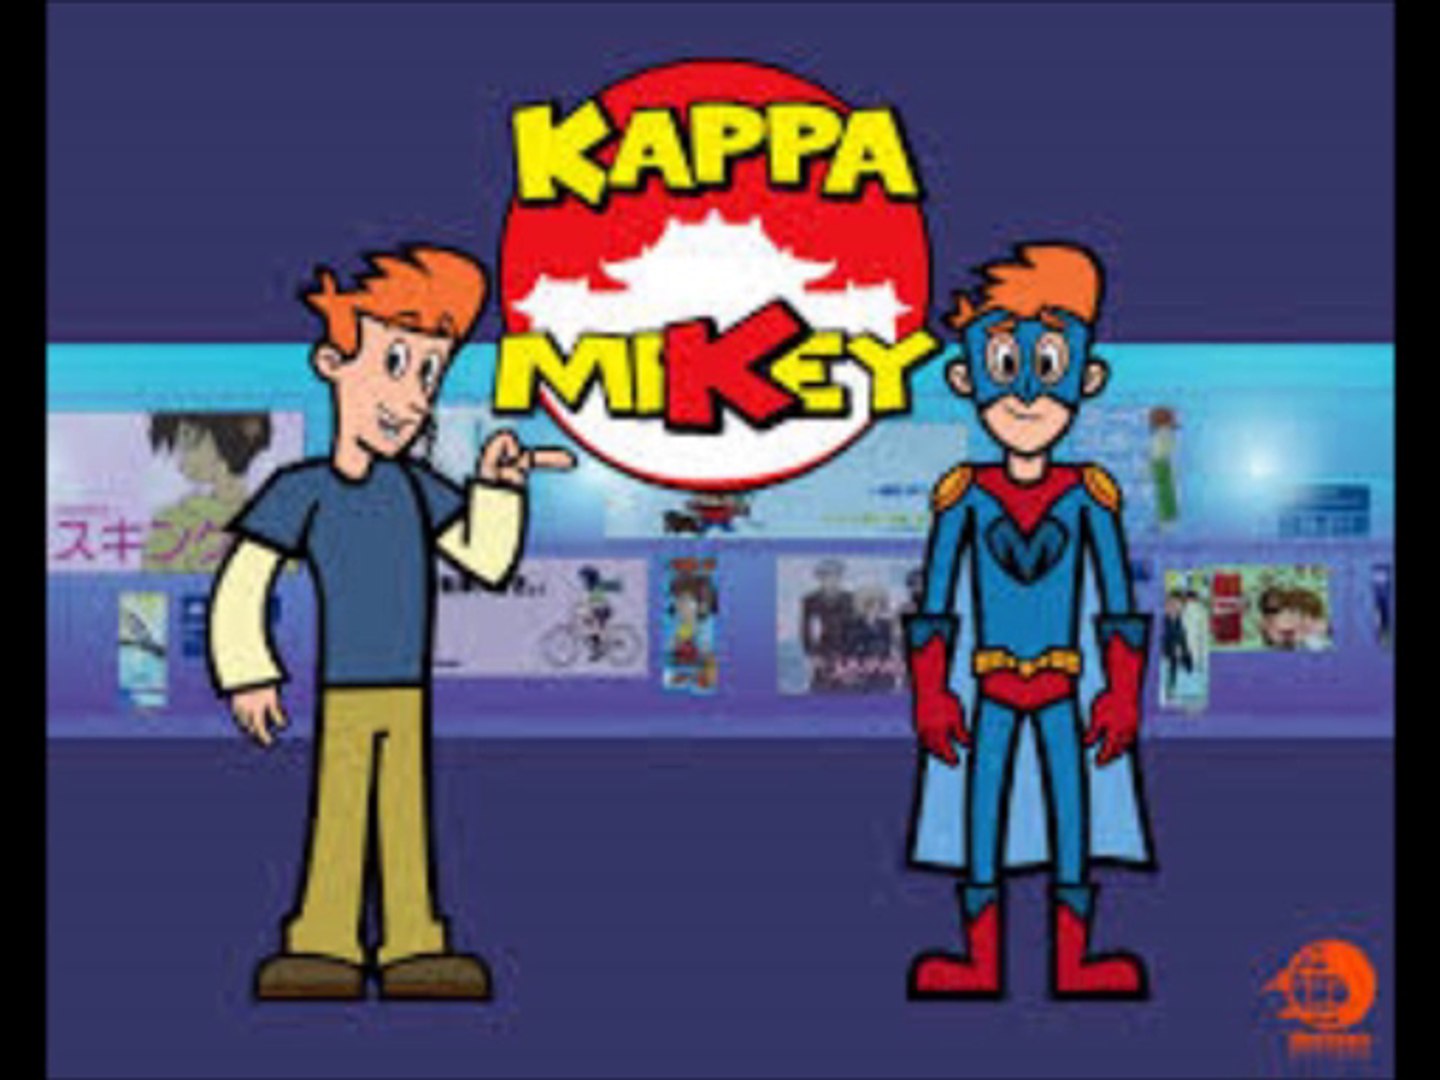 Kappa Mikey Theme Song (Audio) - video Dailymotion